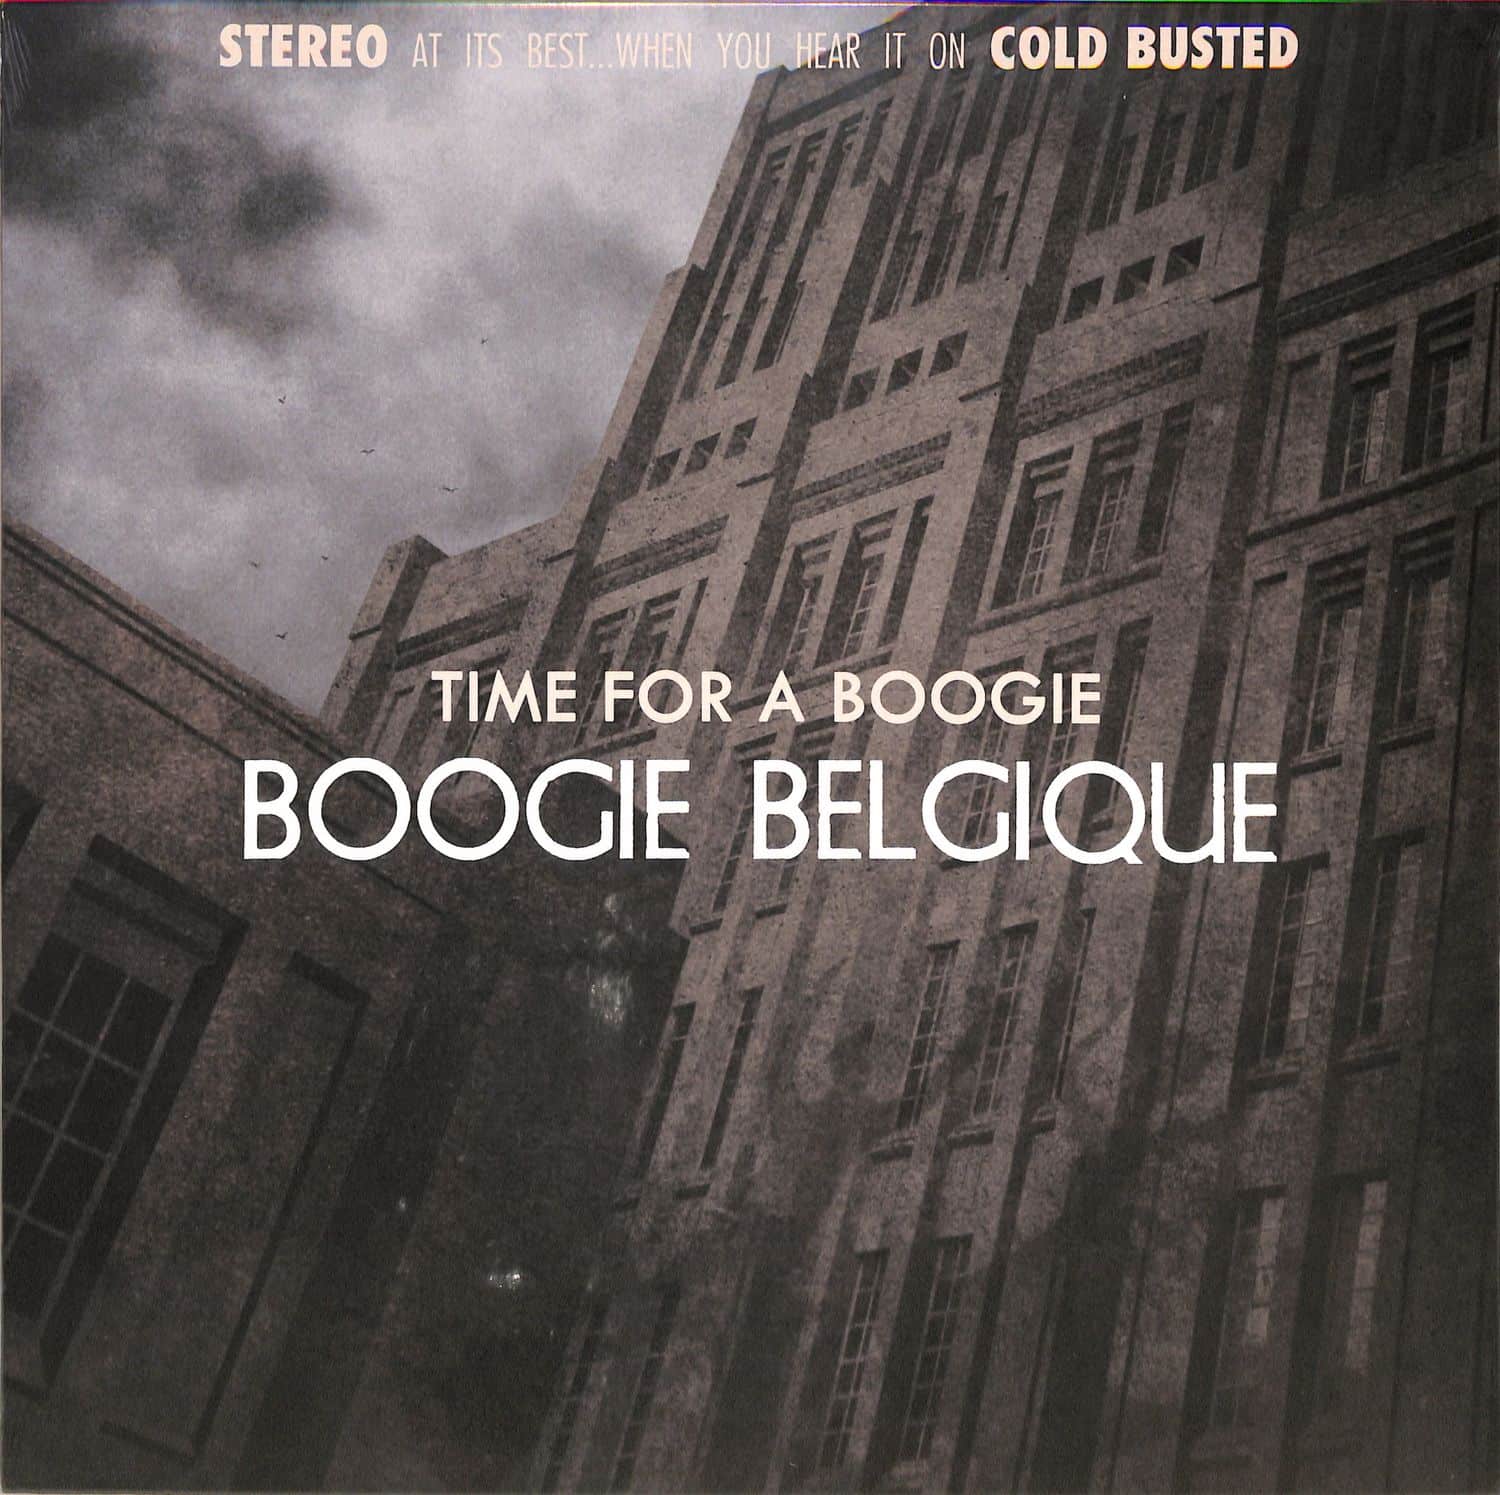 Boogie Belgique - TIME FOR A BOOGIE 